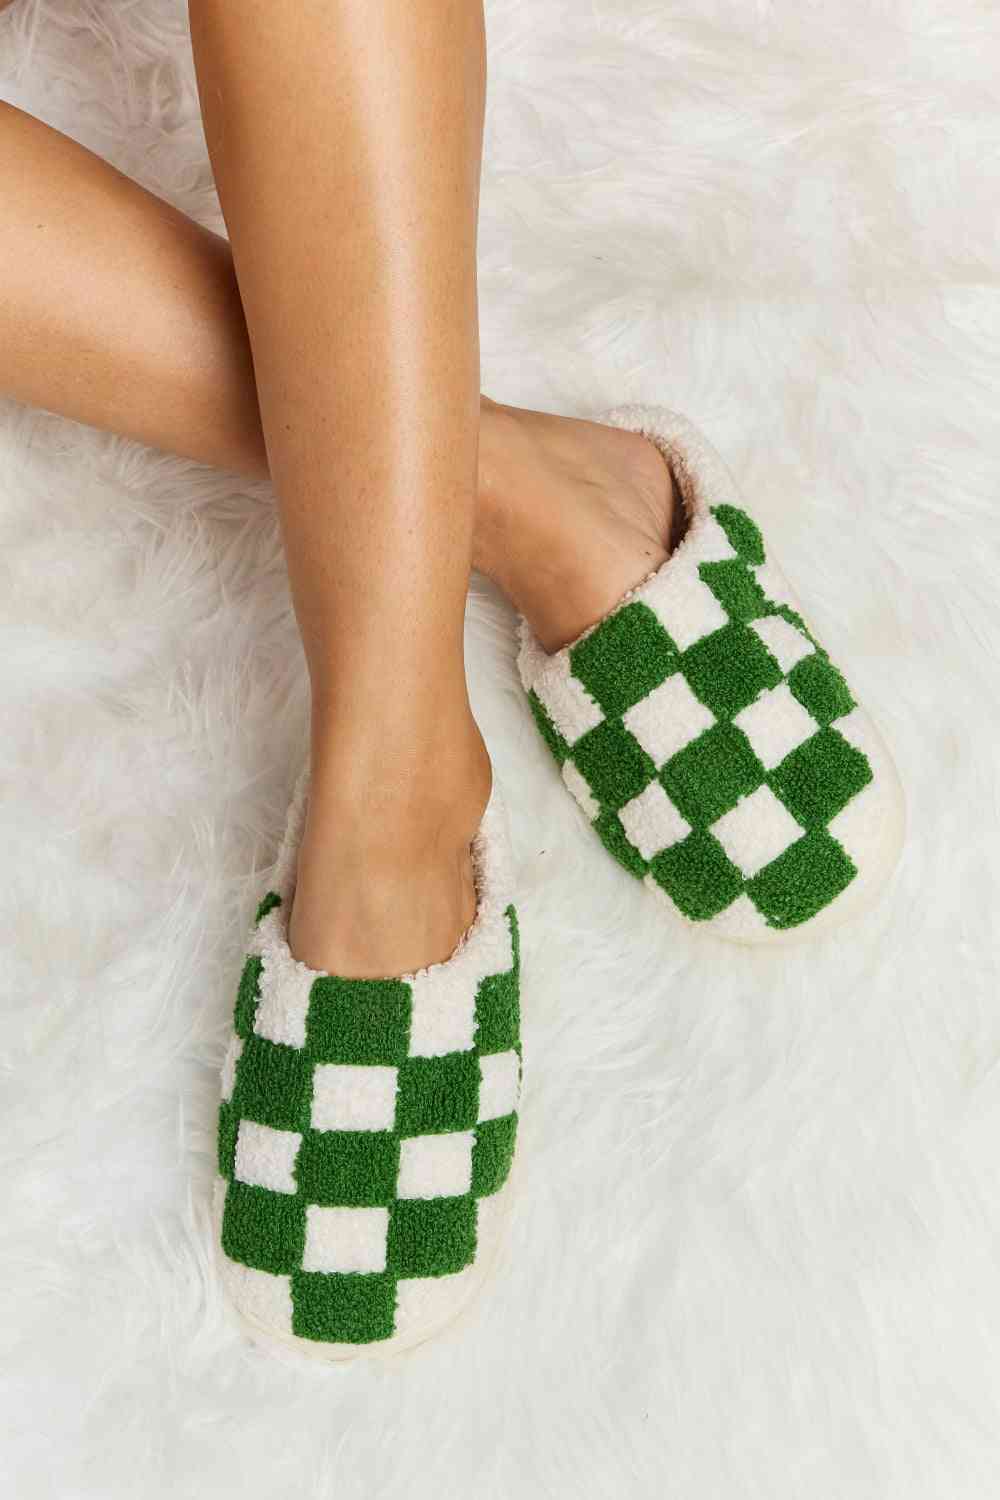 Melody Checkered Print Plush Slide Slippers - 4 Colors